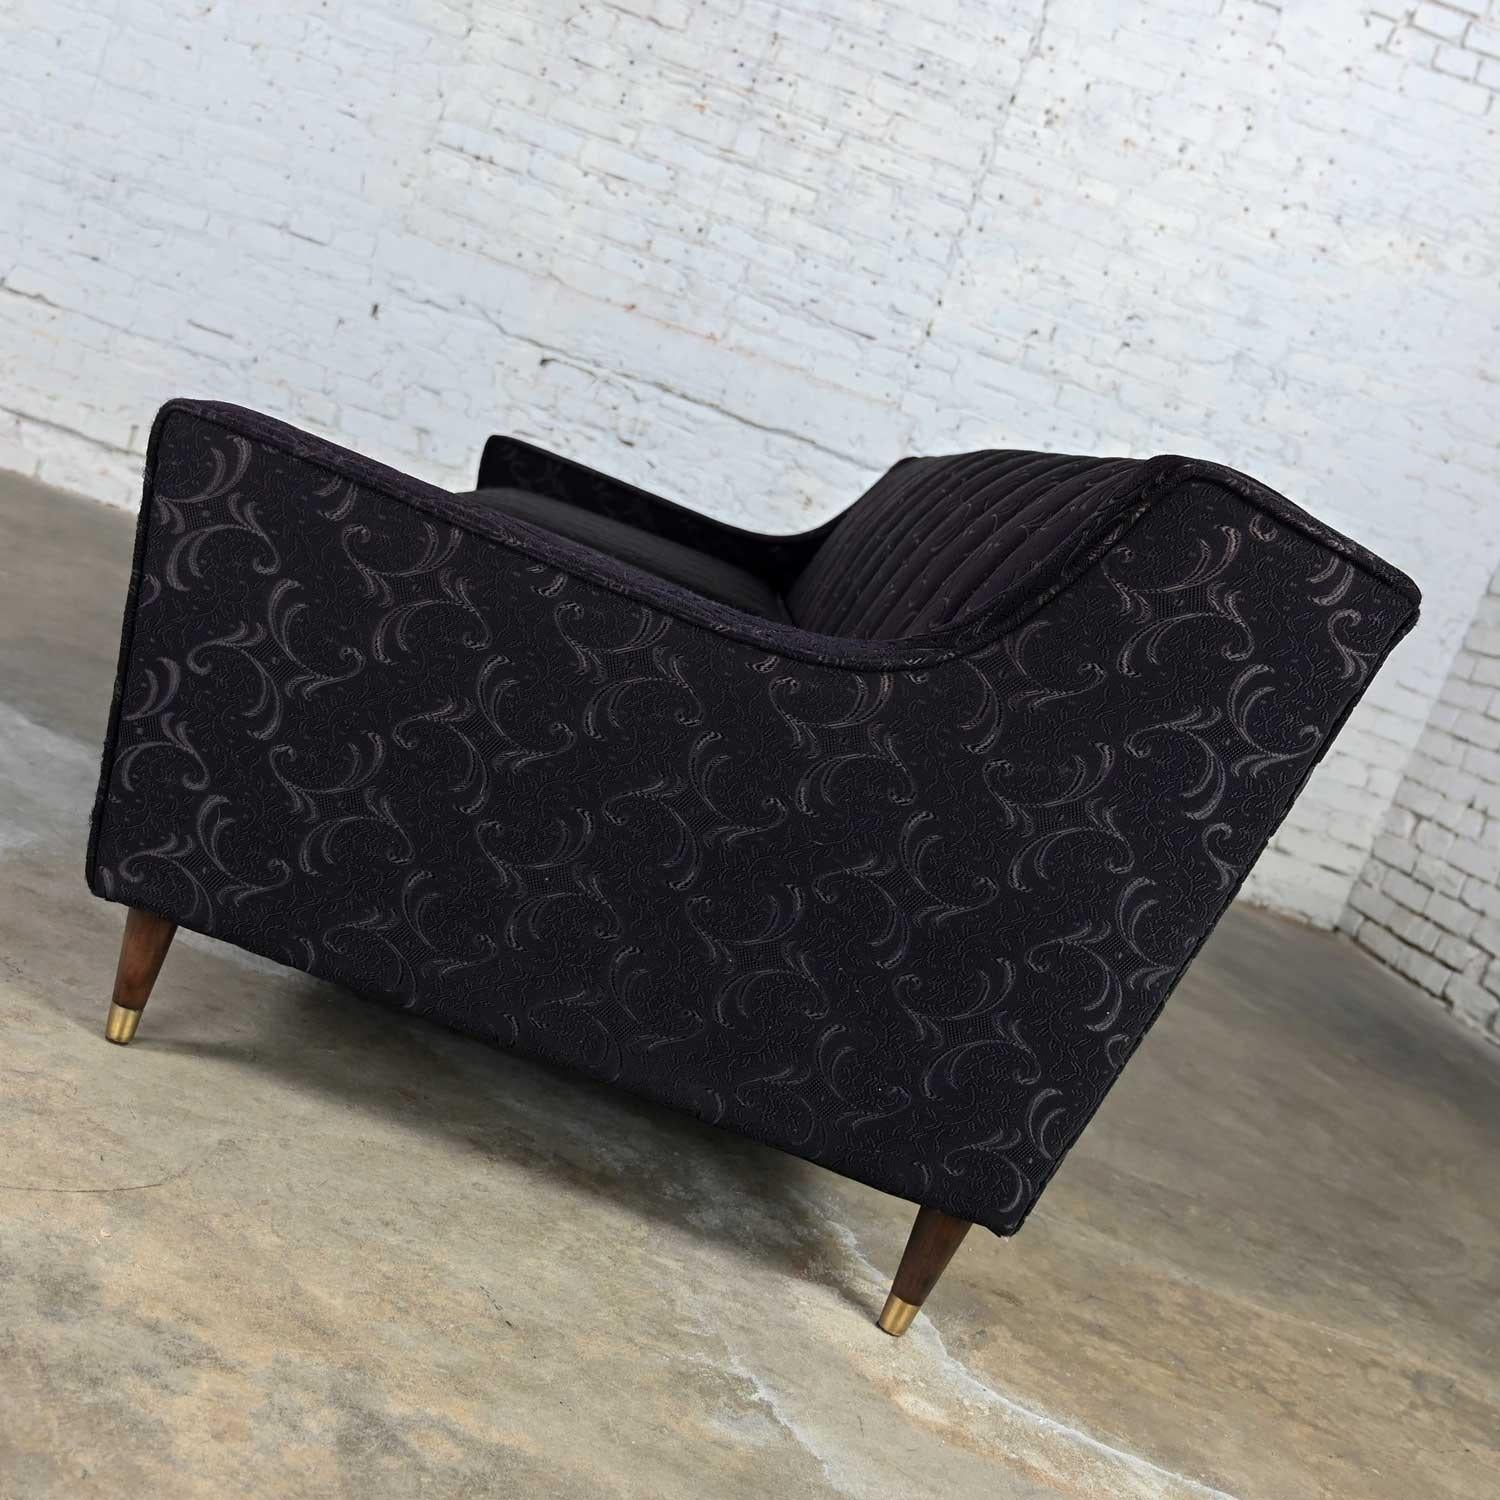 Mid-Century Modern Modified Lawson Style Sofa Black Frieze Fabric & Channel Back For Sale 3